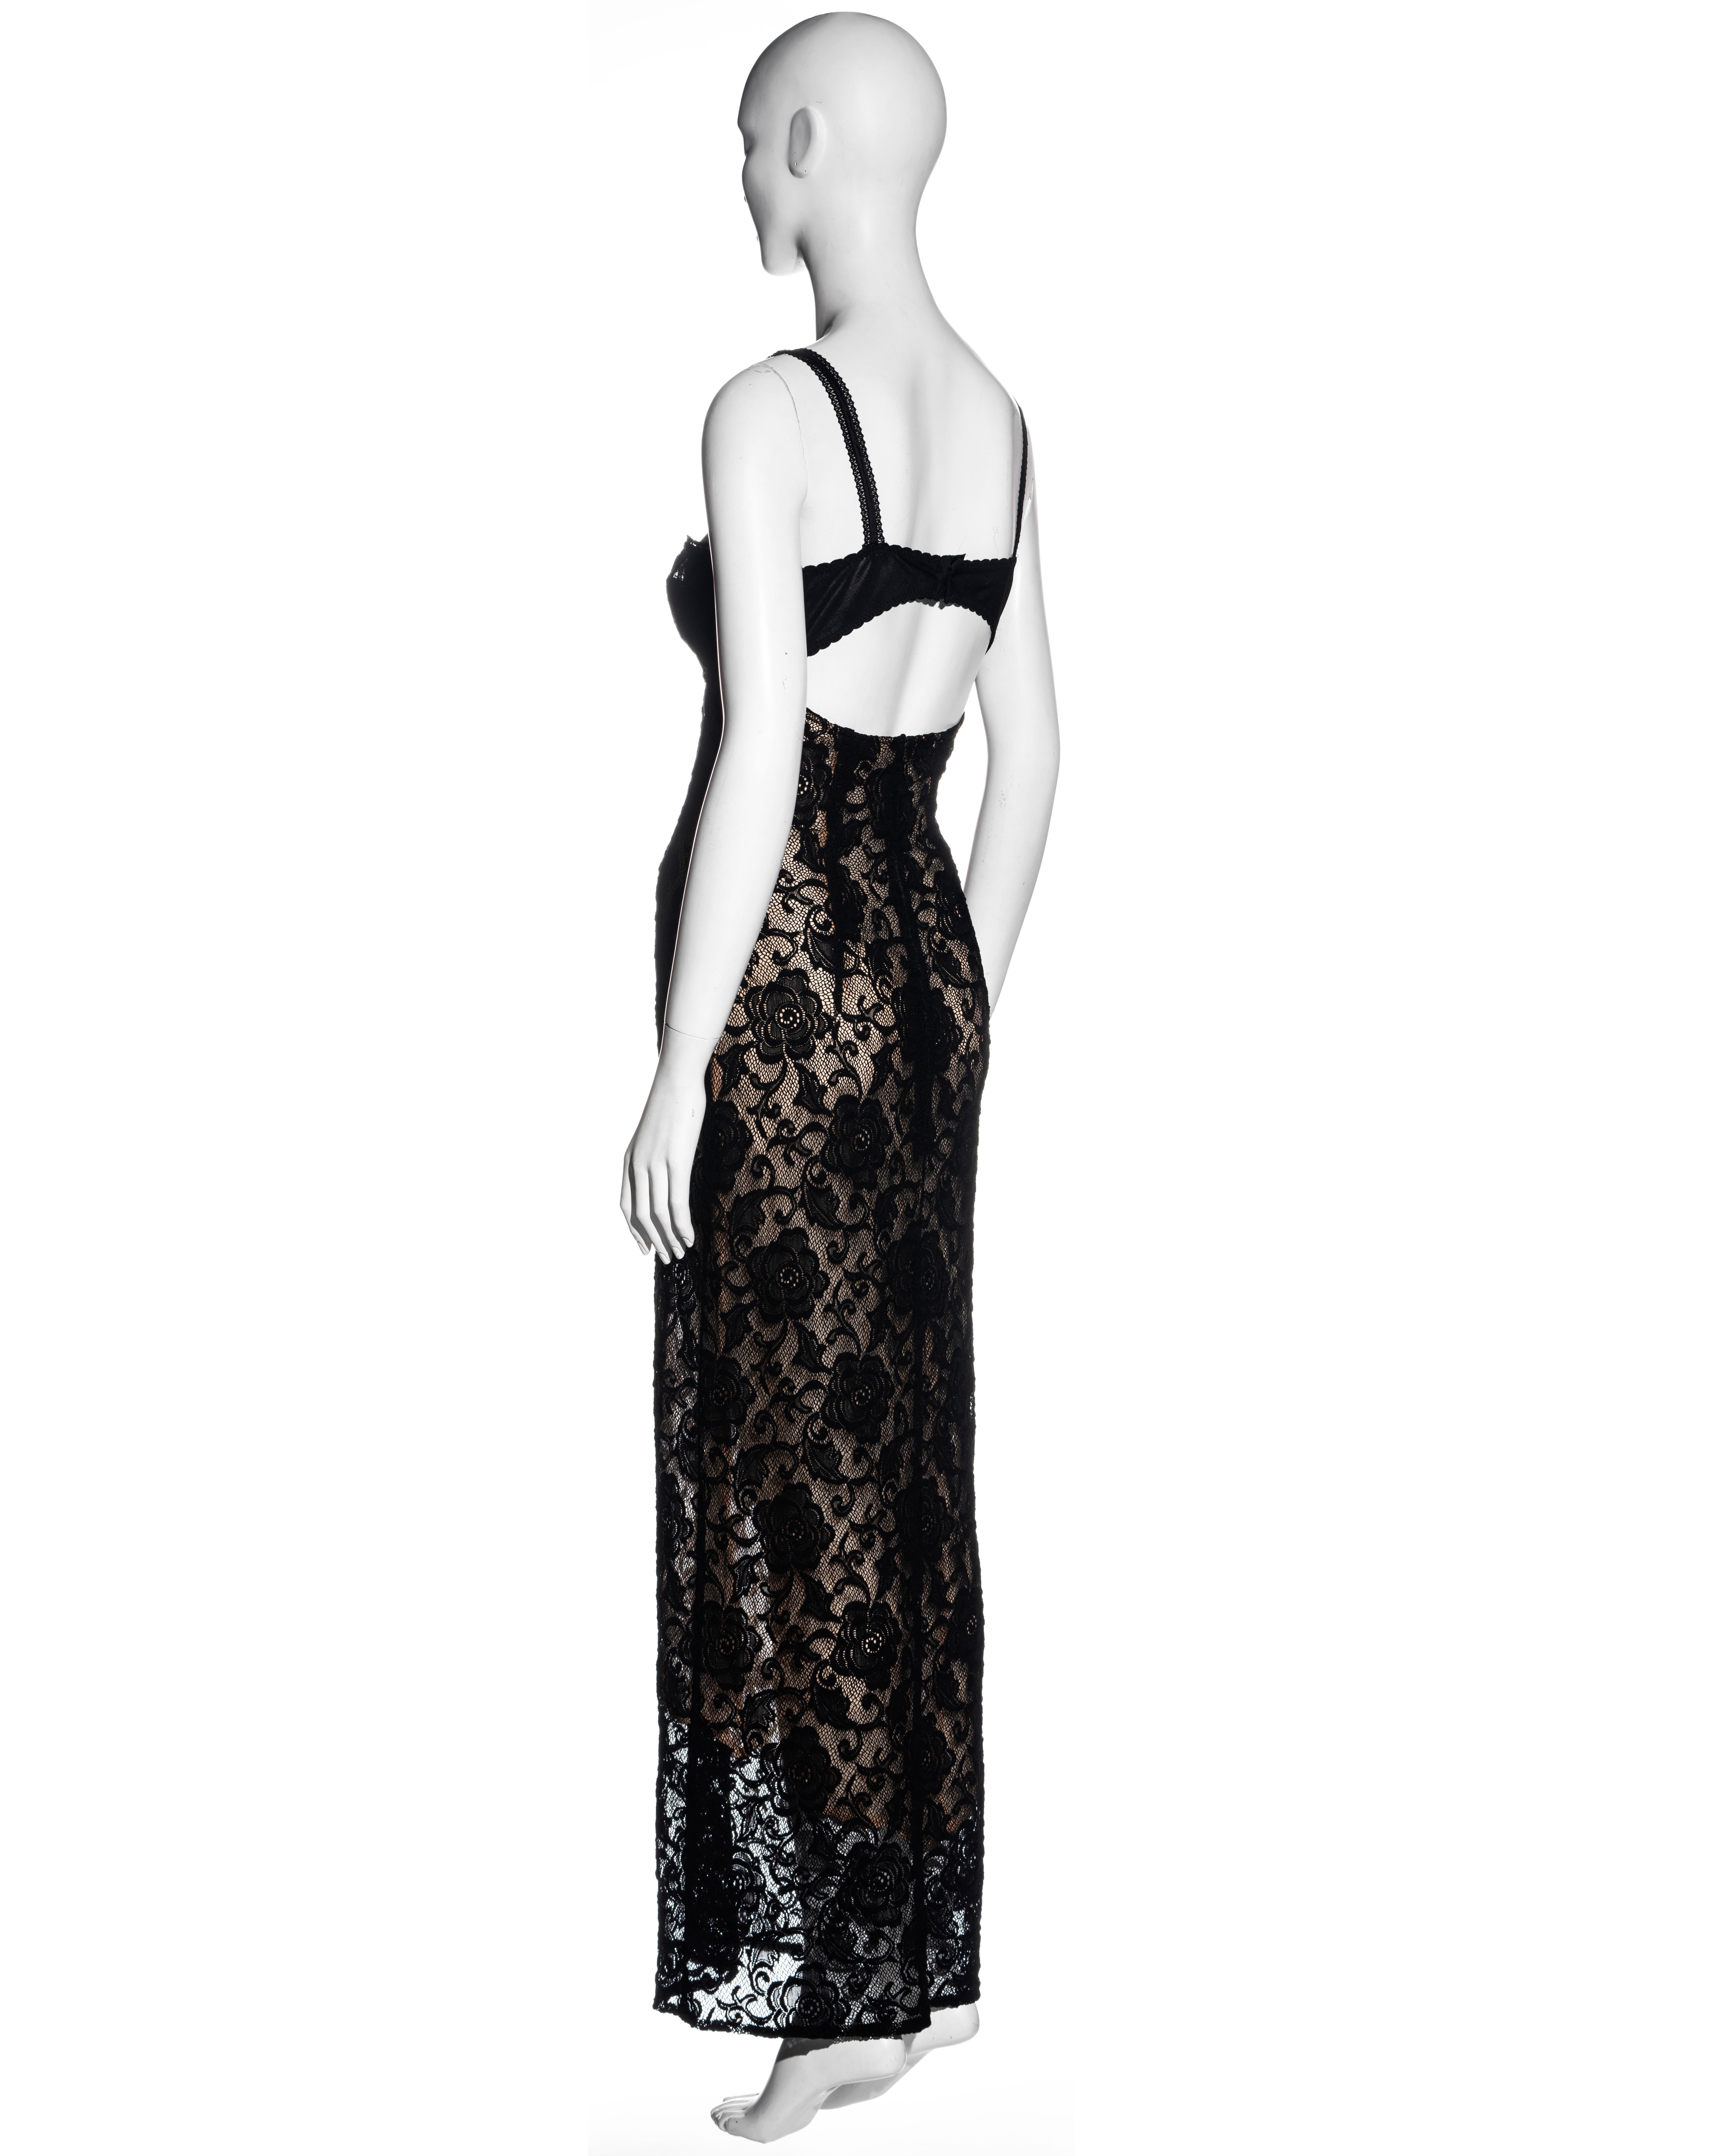 Dolce & Gabbana black lace evening dress with attached bra, ss 1997 For Sale 1